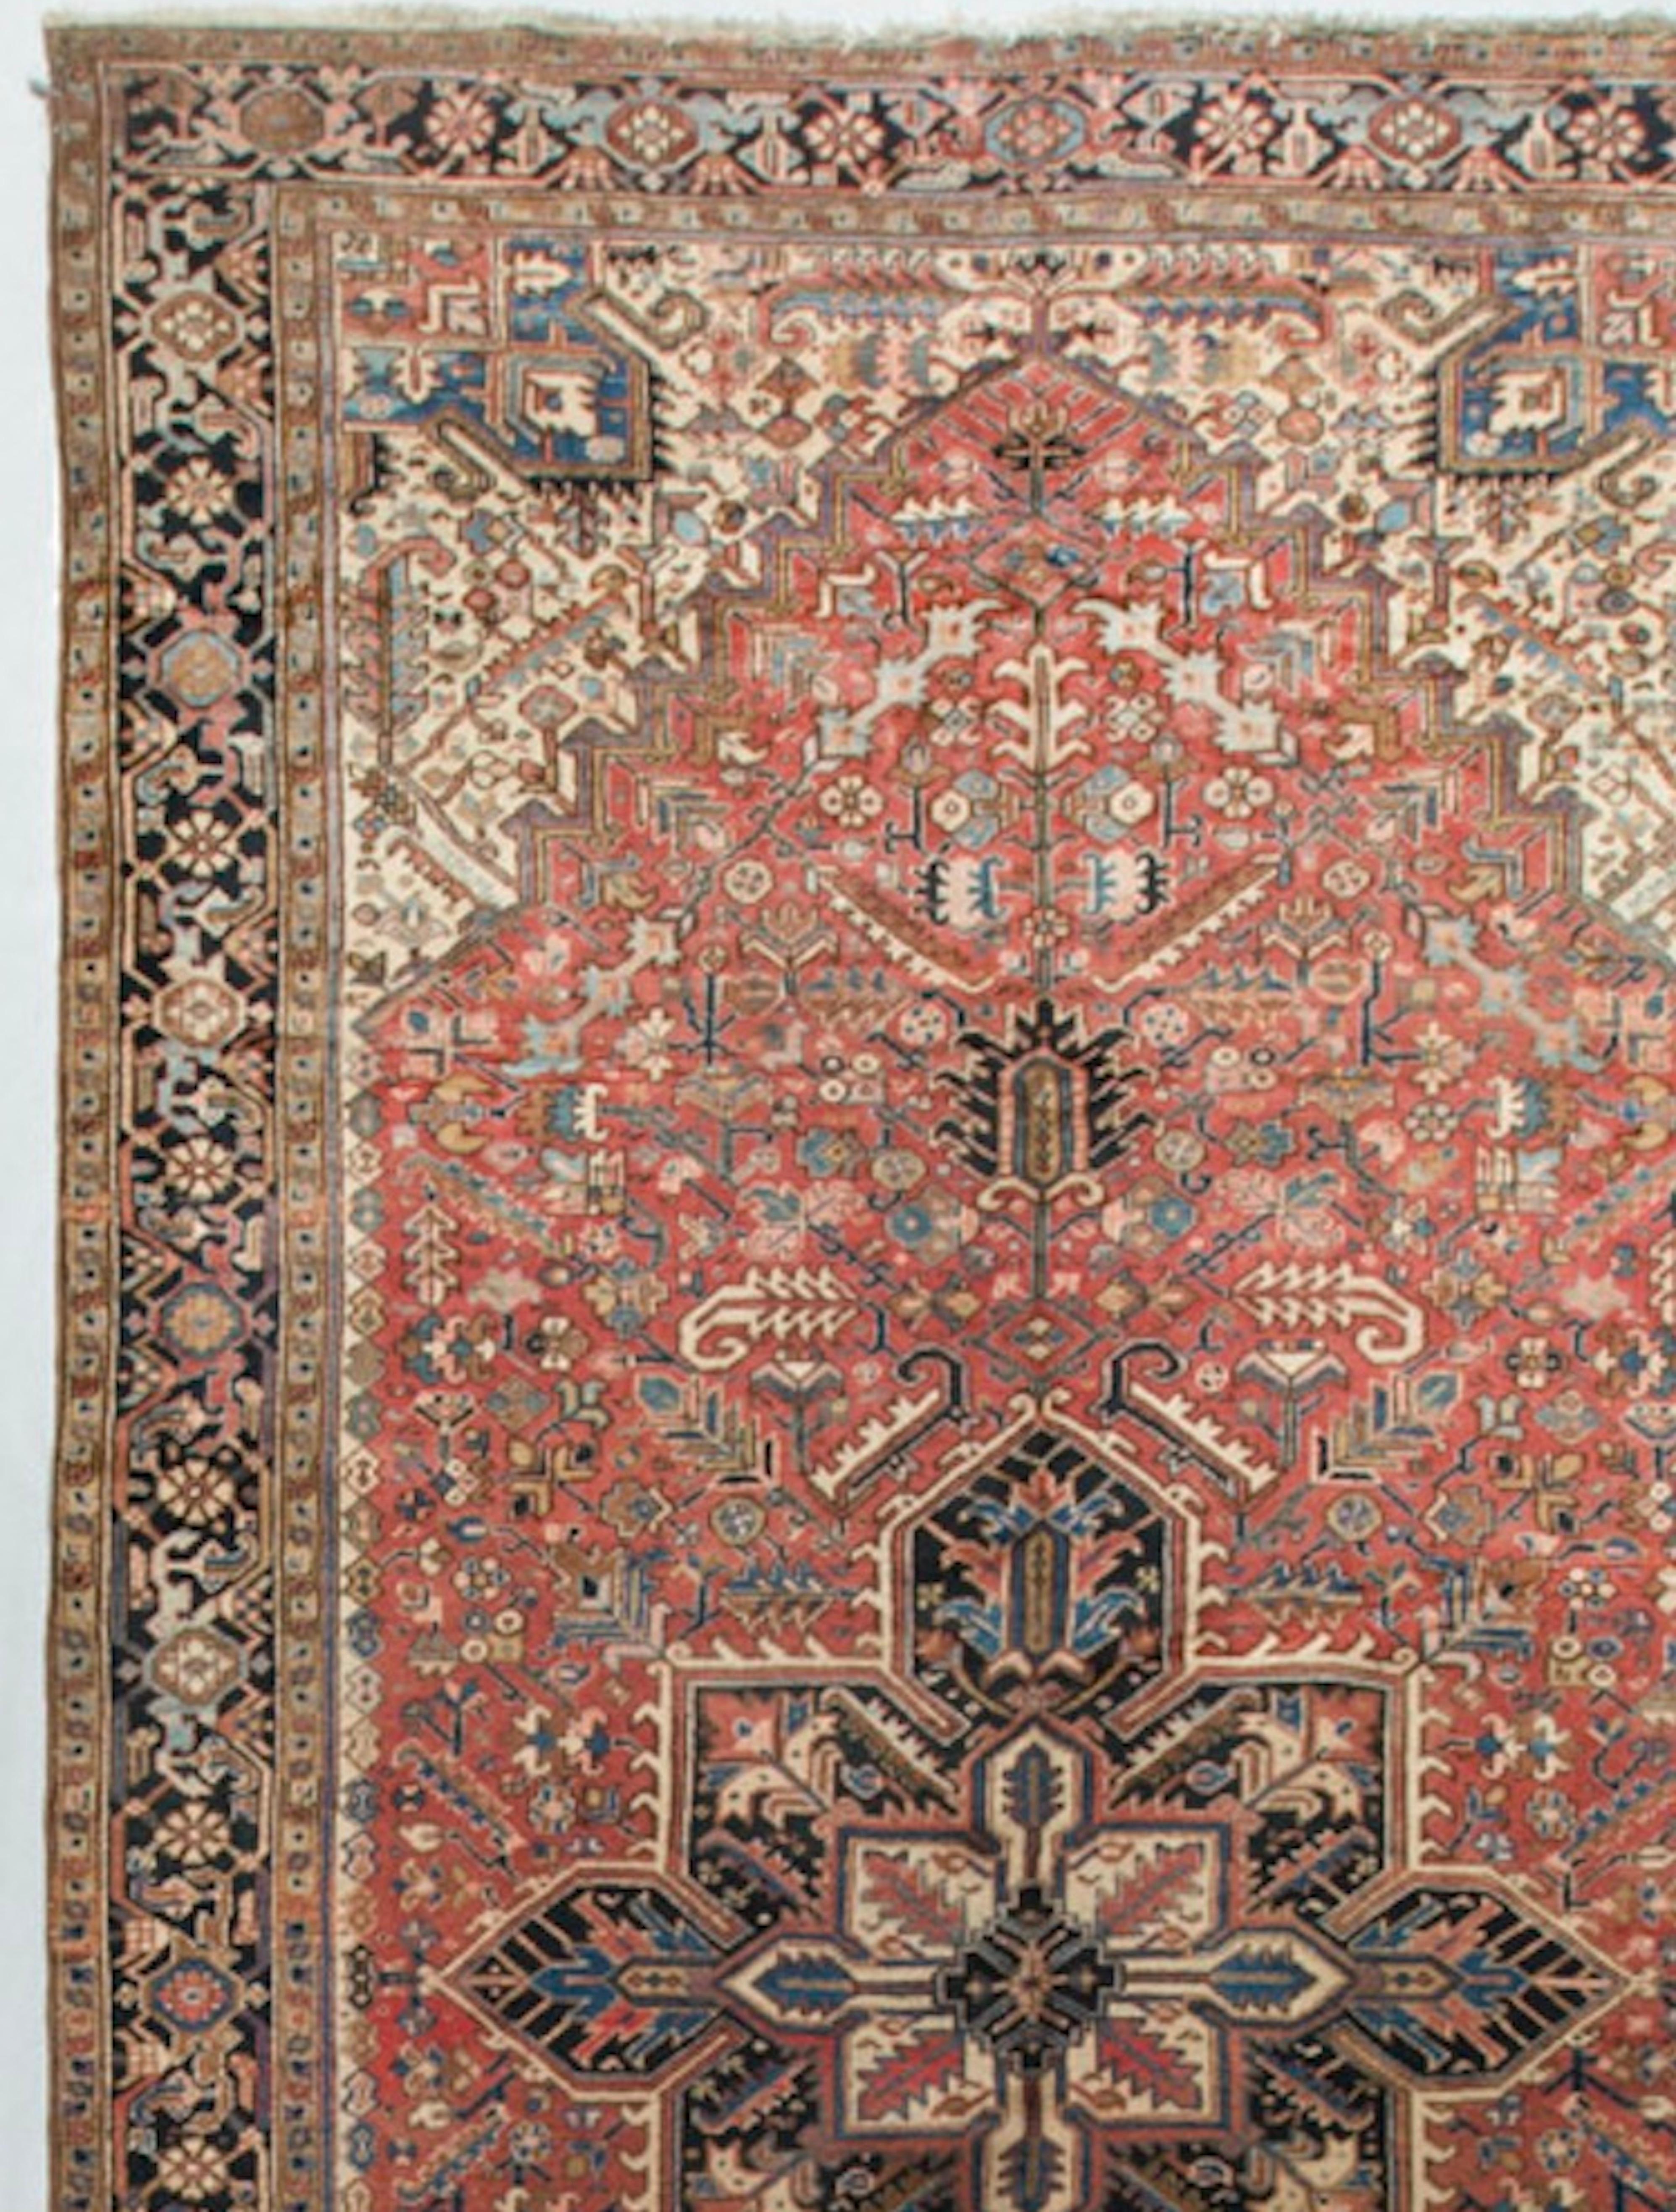 The distinctive use of the ivory in the four corners, brings the central medallion and surrounding patterns into focus and lightens up the whole field, to create this typical Heriz style rug. The small town of Heriz in North West Persia is the